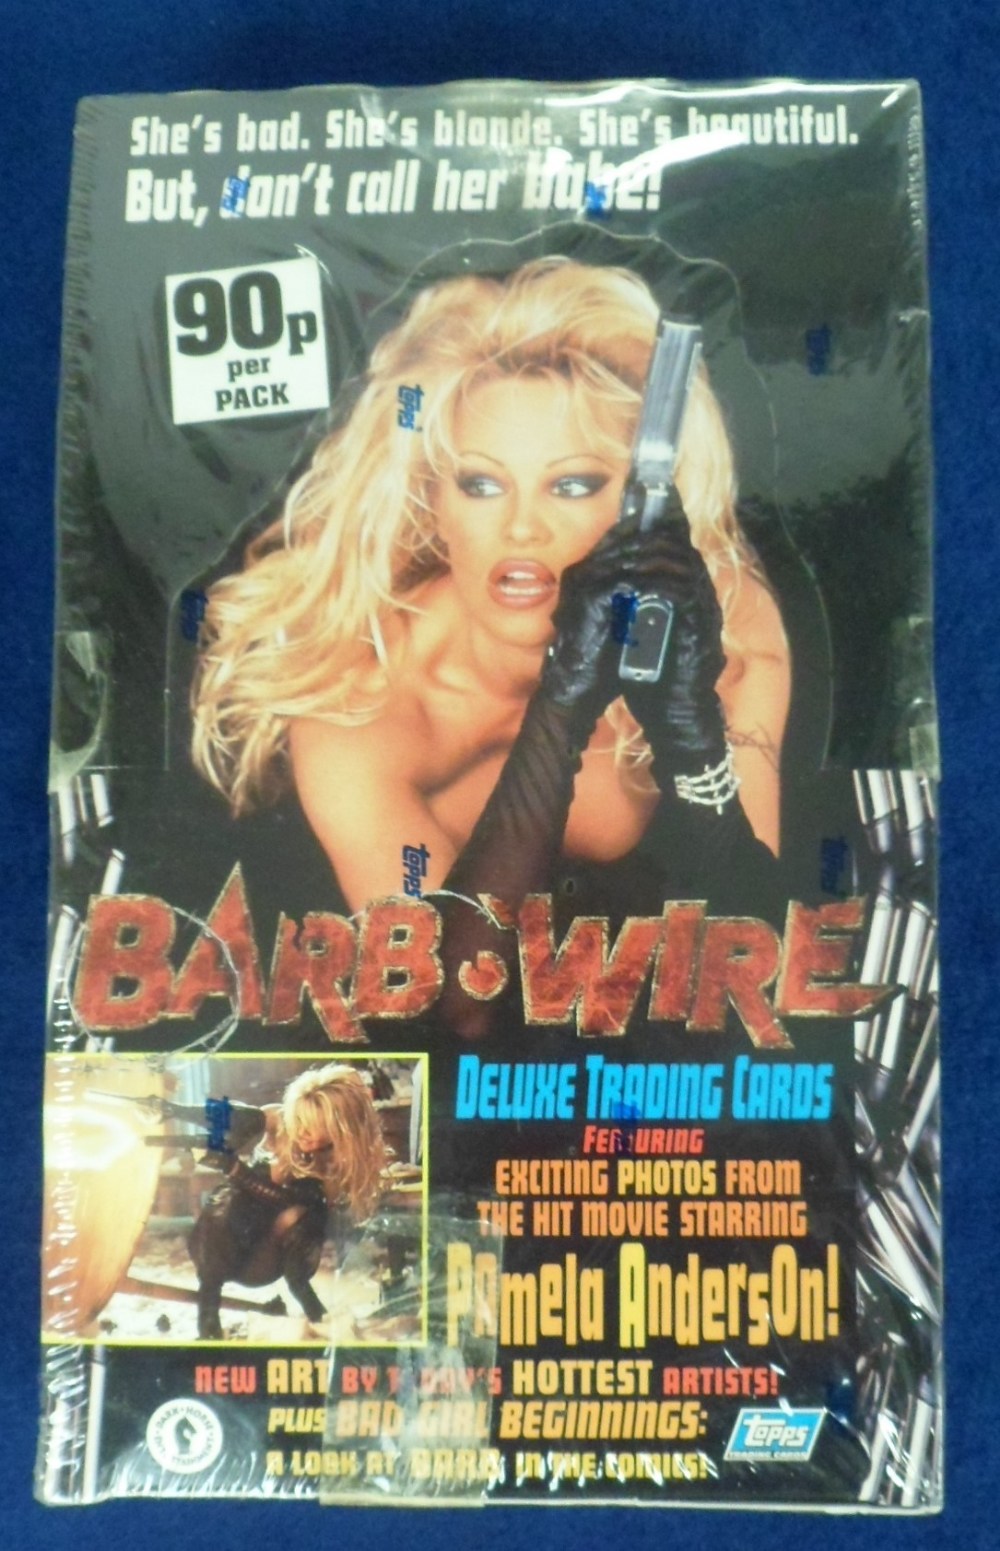 Trade cards, Topps, Barbed Wire, 1996 Counter Display Box still sealed and complete with 36 unopened